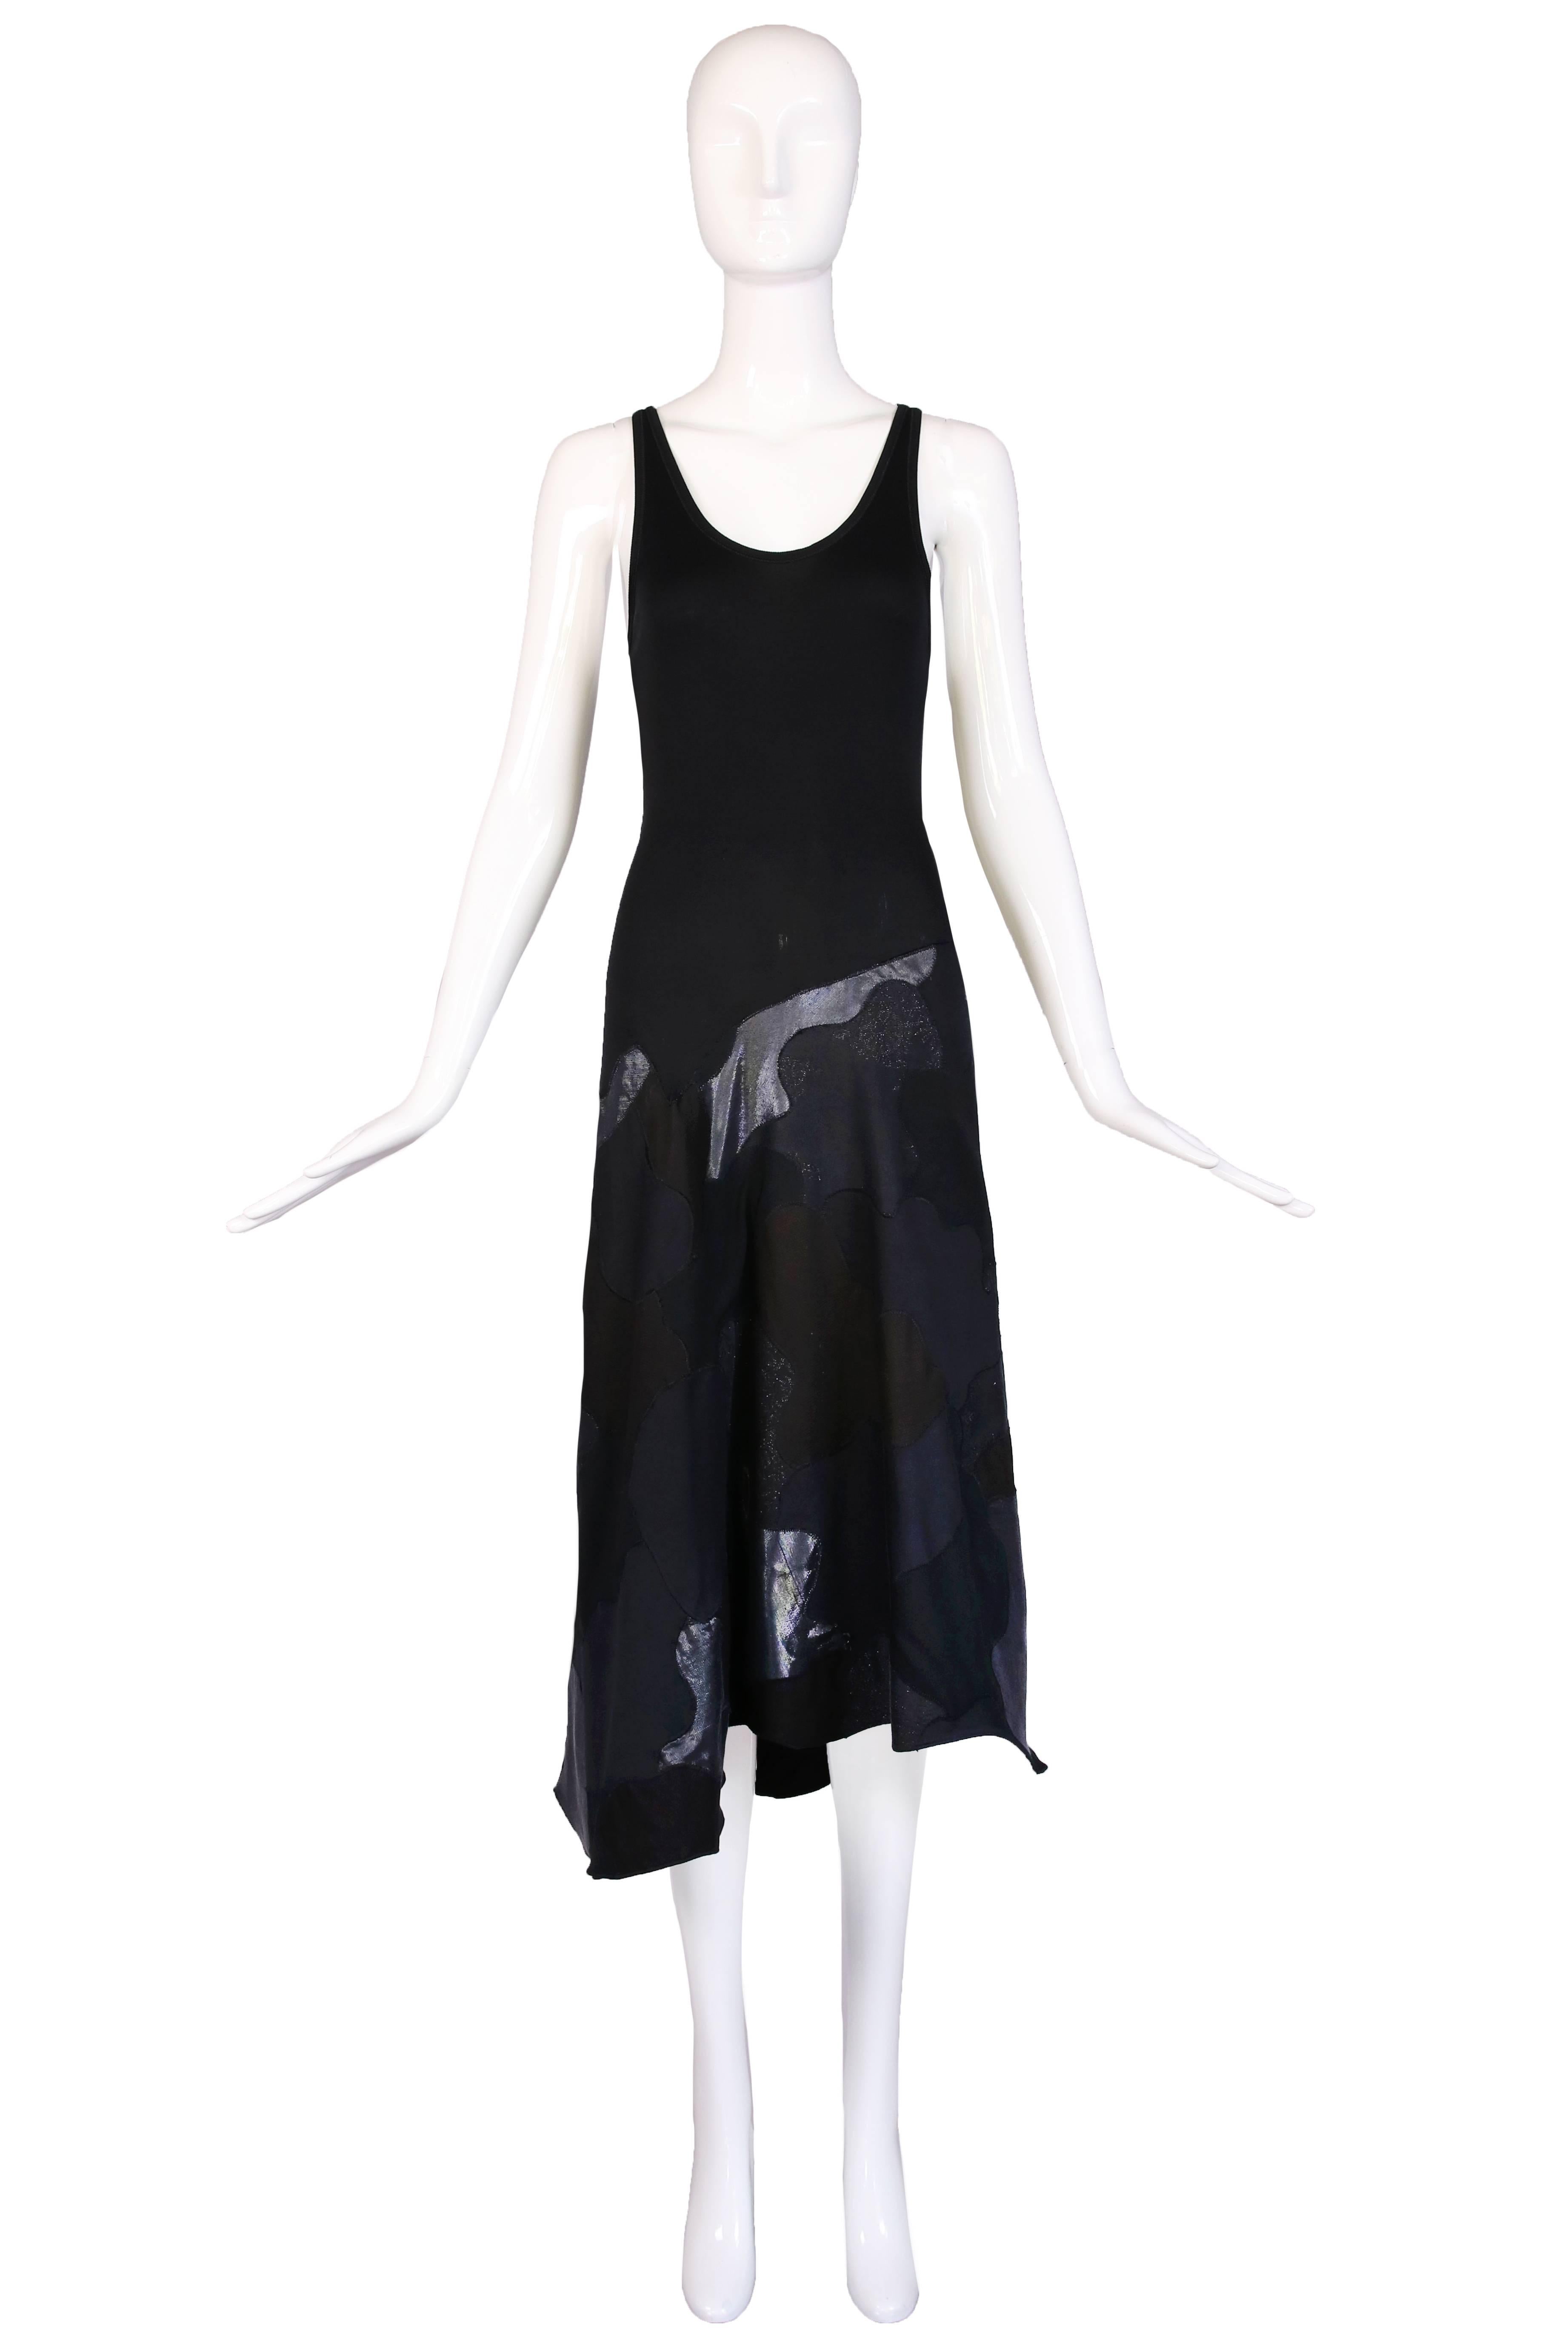 Circa 2003 Alexander McQueen black stretch cotton tank dress with skirt appliquéd in what looks like a cammo print. In excellent condition - missing fabric tag. Size 40.